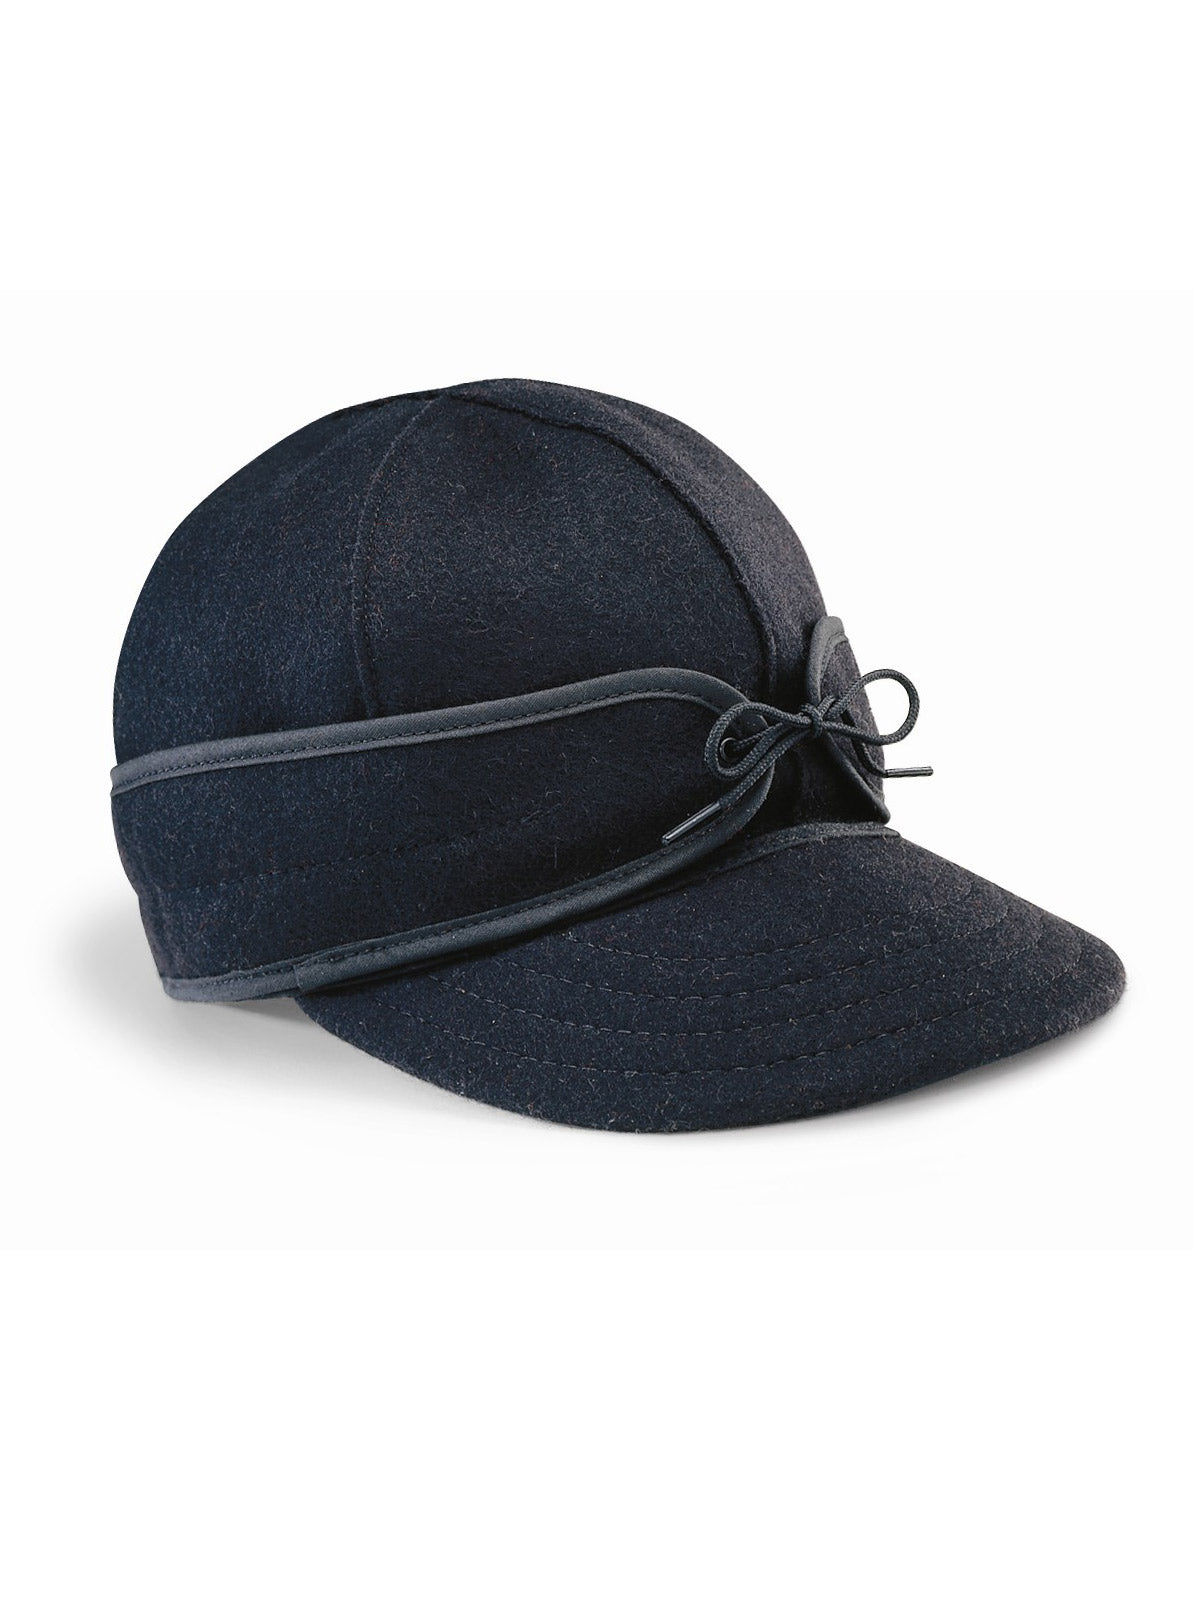 Origional Stormy Kromer Caps With Ear Band in Black - 50010-BLK